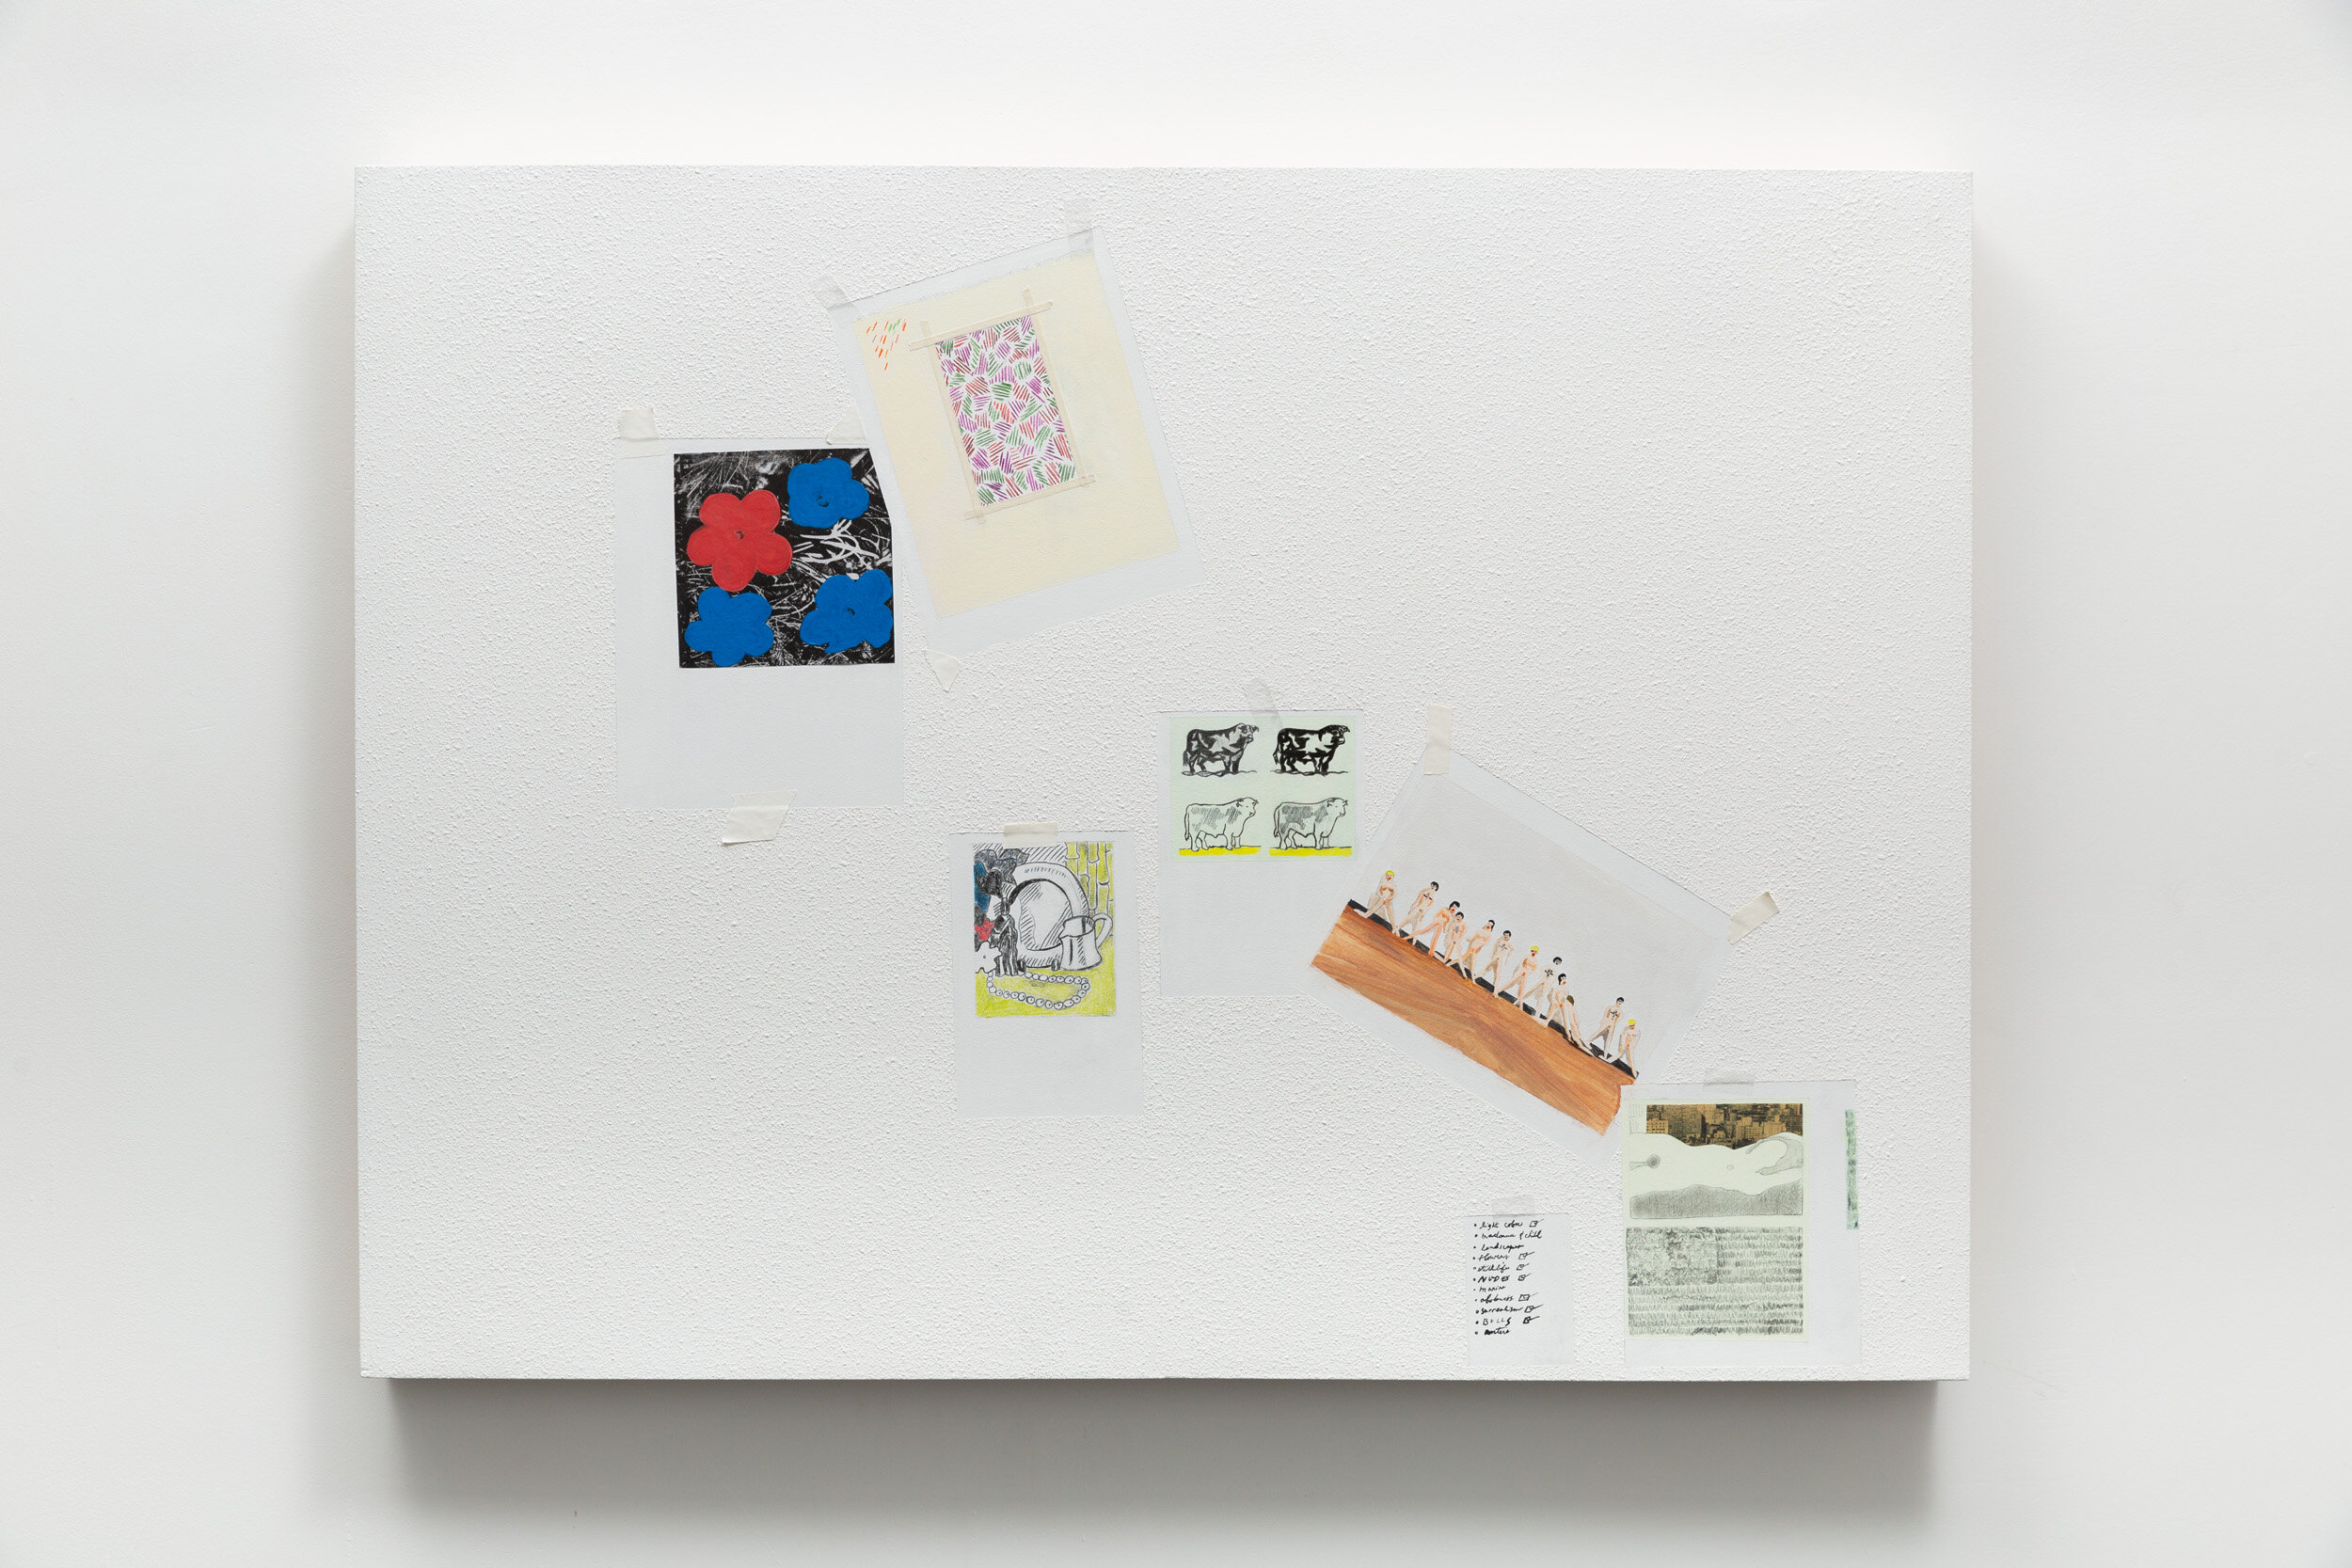   A Painting That Wants To Sell (R.I.P. Sturtevant)    Wood, drywall, corner bead, plaster, paint, cardboard, paper, acrylic, colored pencil, graphite, tape   36" x 48"   2021   